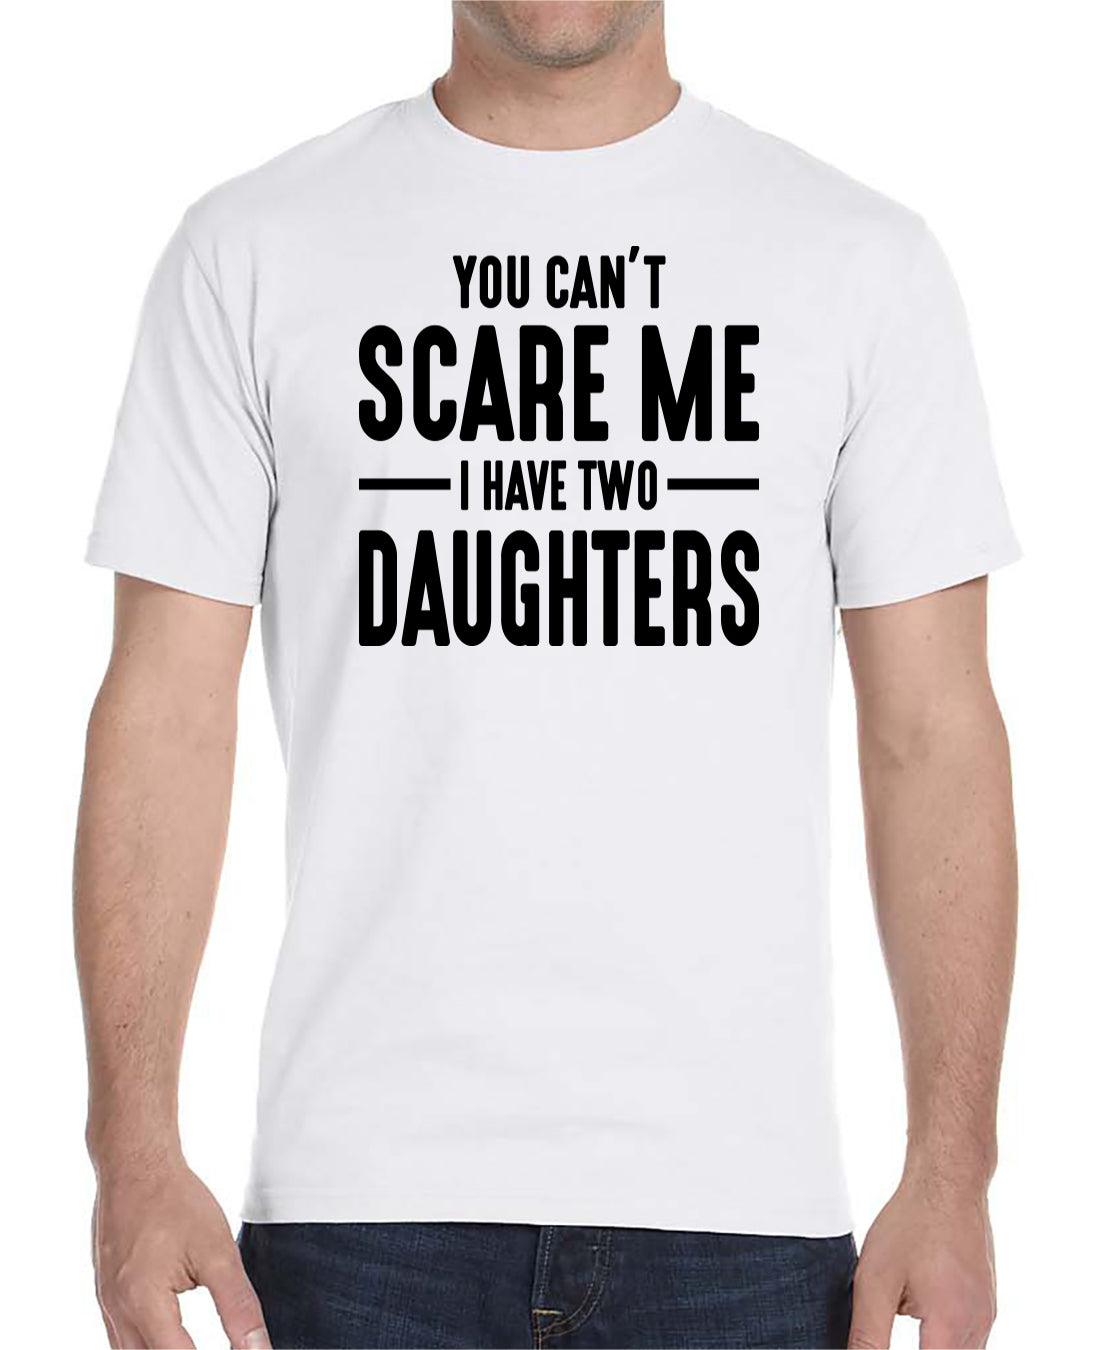 You Can't Scare Me I Have Two Daughters - Unisex T-Shirt - Dad Shirt - Dad Gift